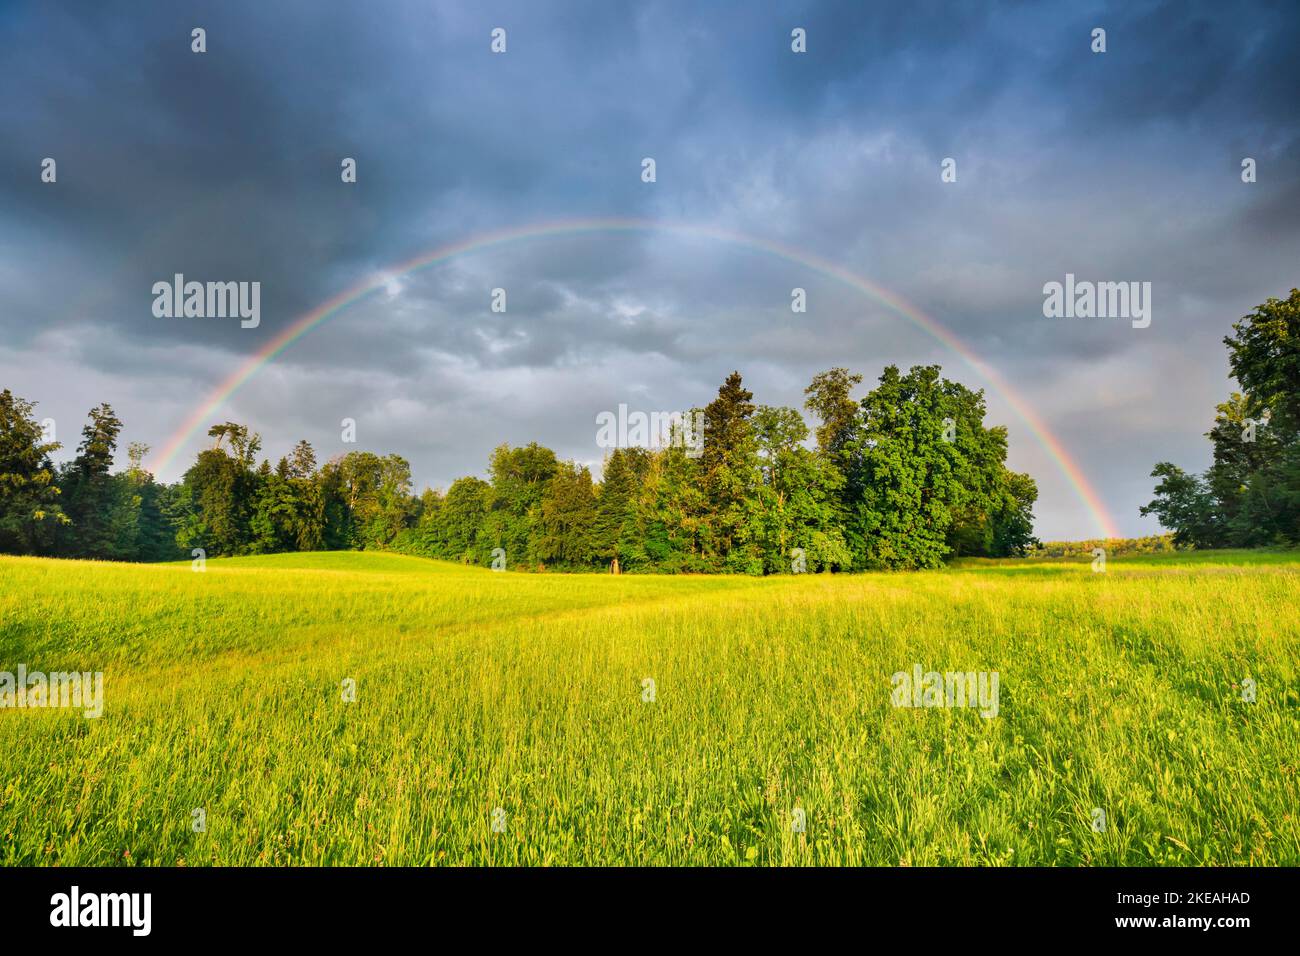 Evening thundery atmosphere with double rainbow over green mixed forest, Switzerland, Zuercher Oberland Stock Photo